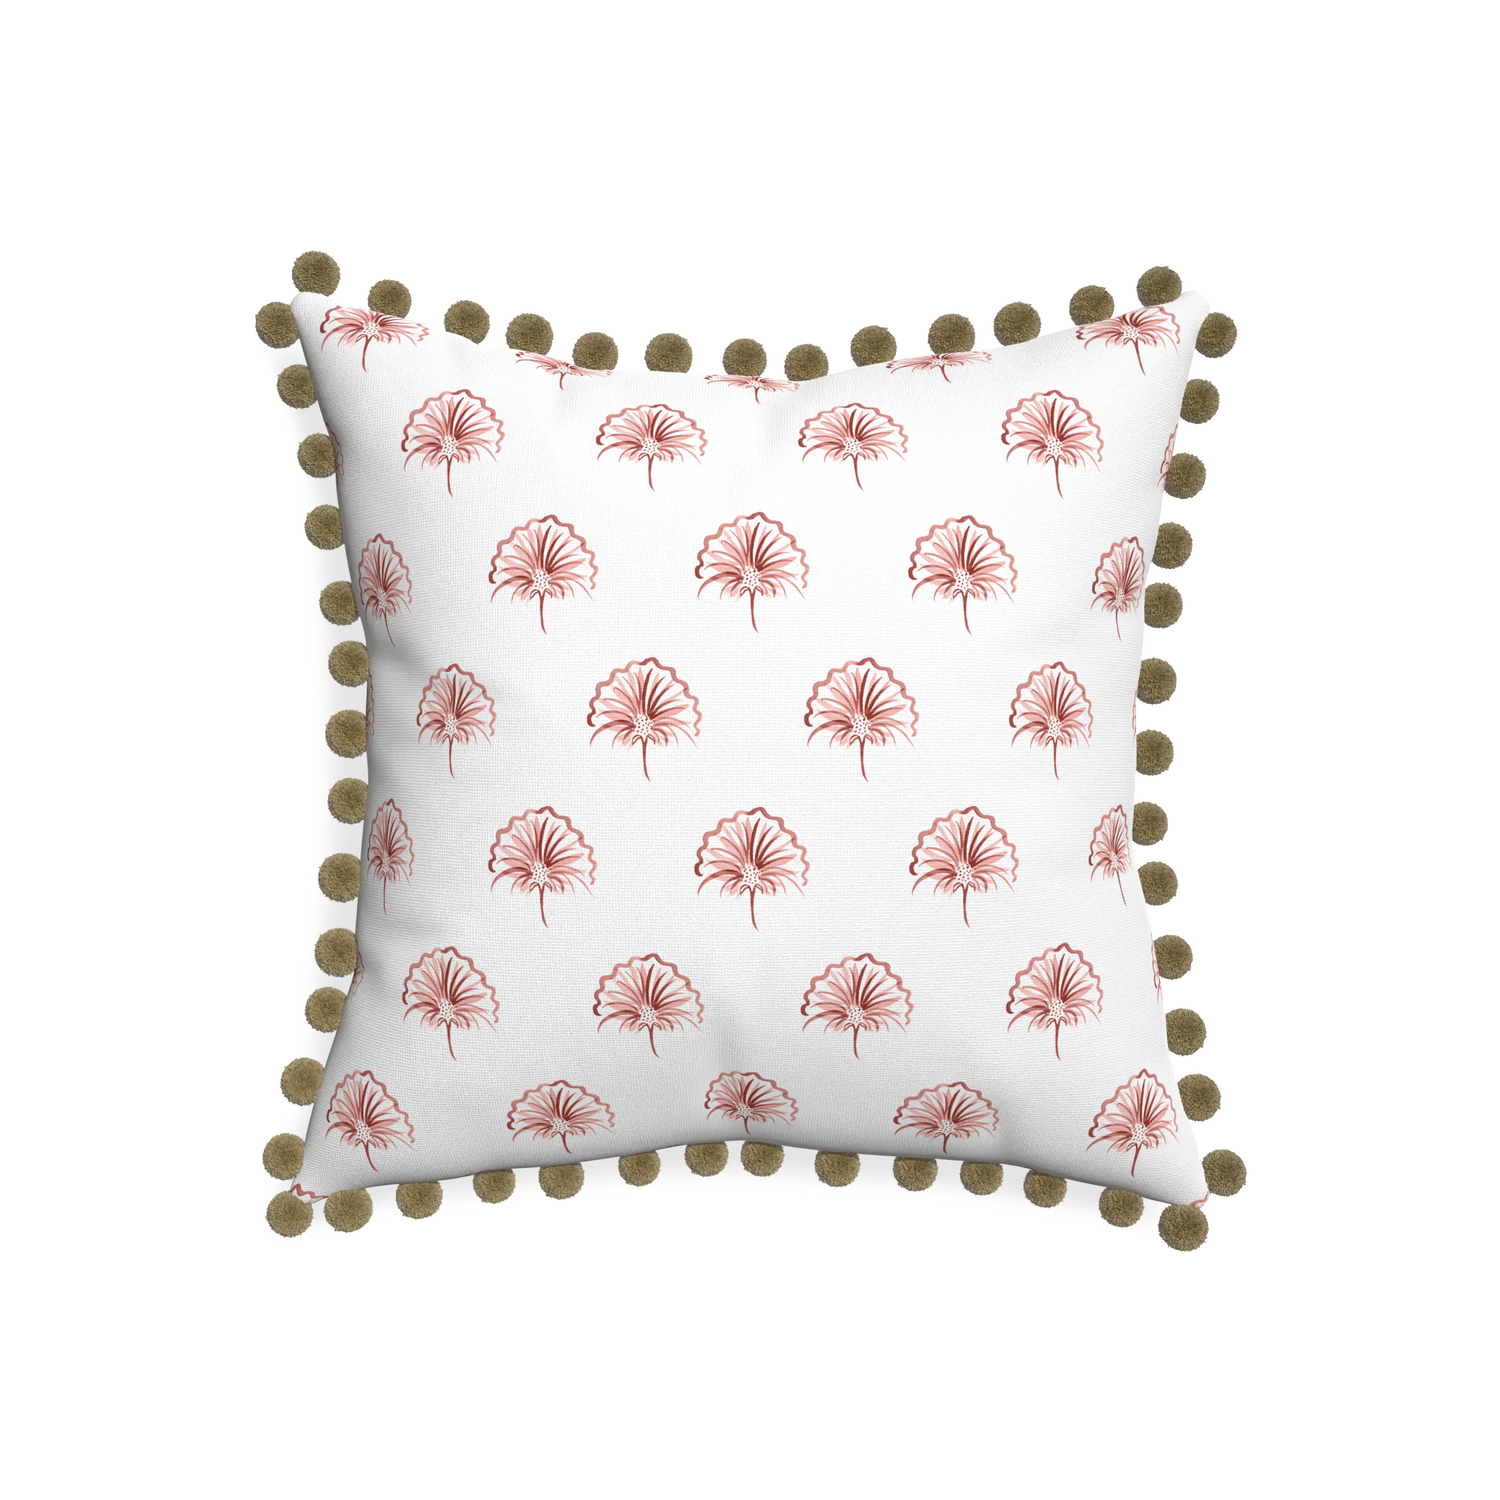 20-square penelope rose custom floral pinkpillow with olive pom pom on white background